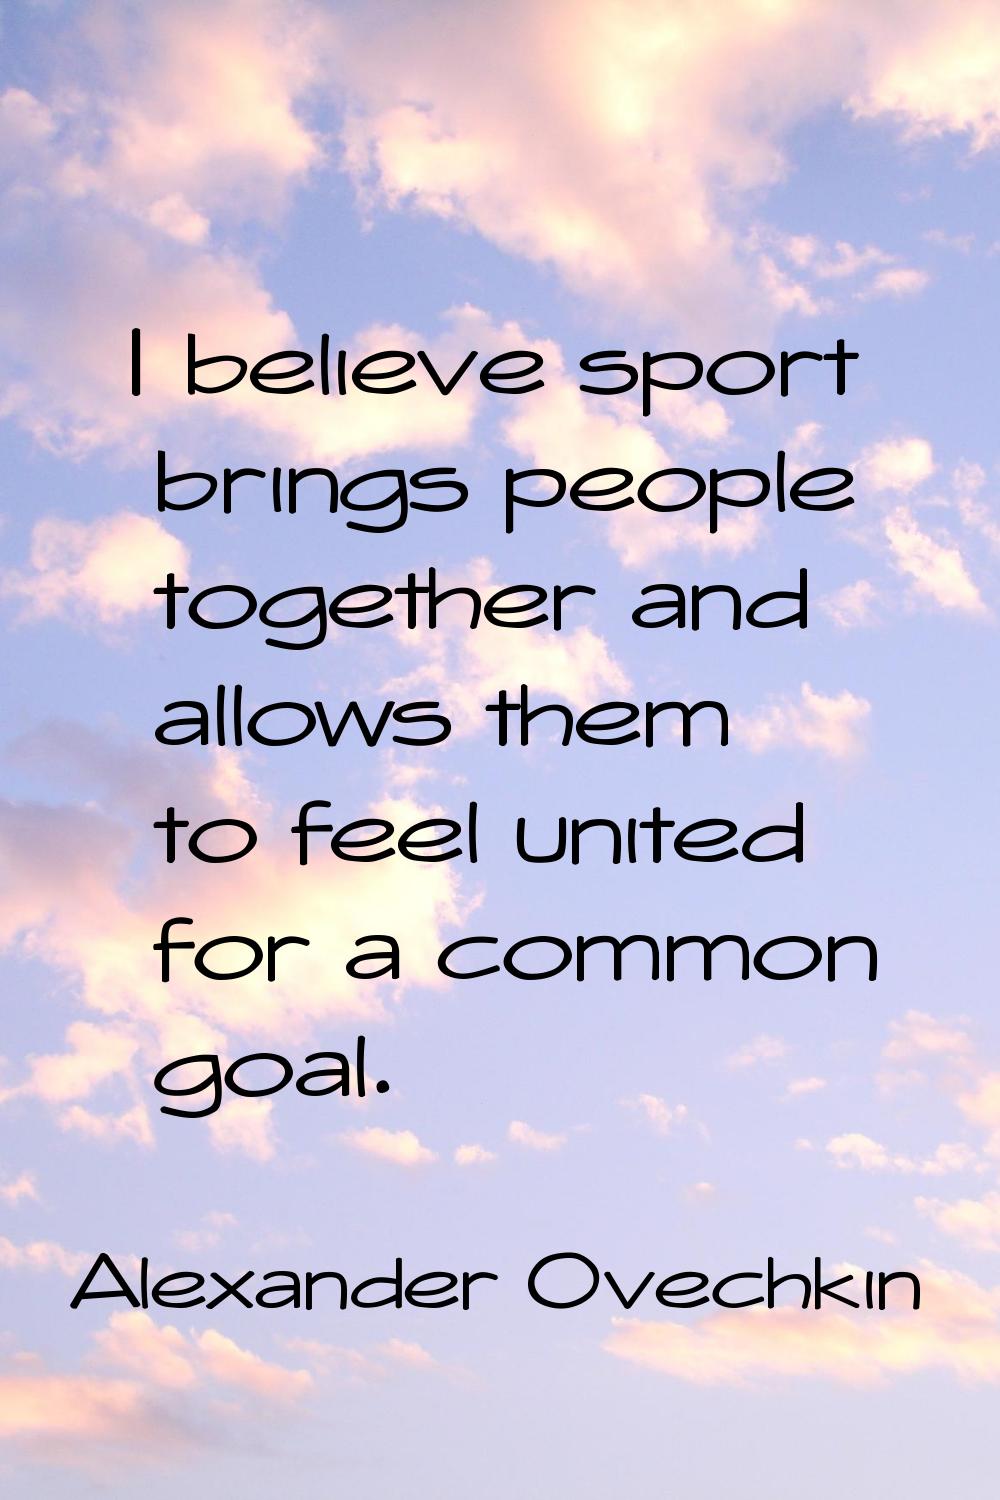 I believe sport brings people together and allows them to feel united for a common goal.